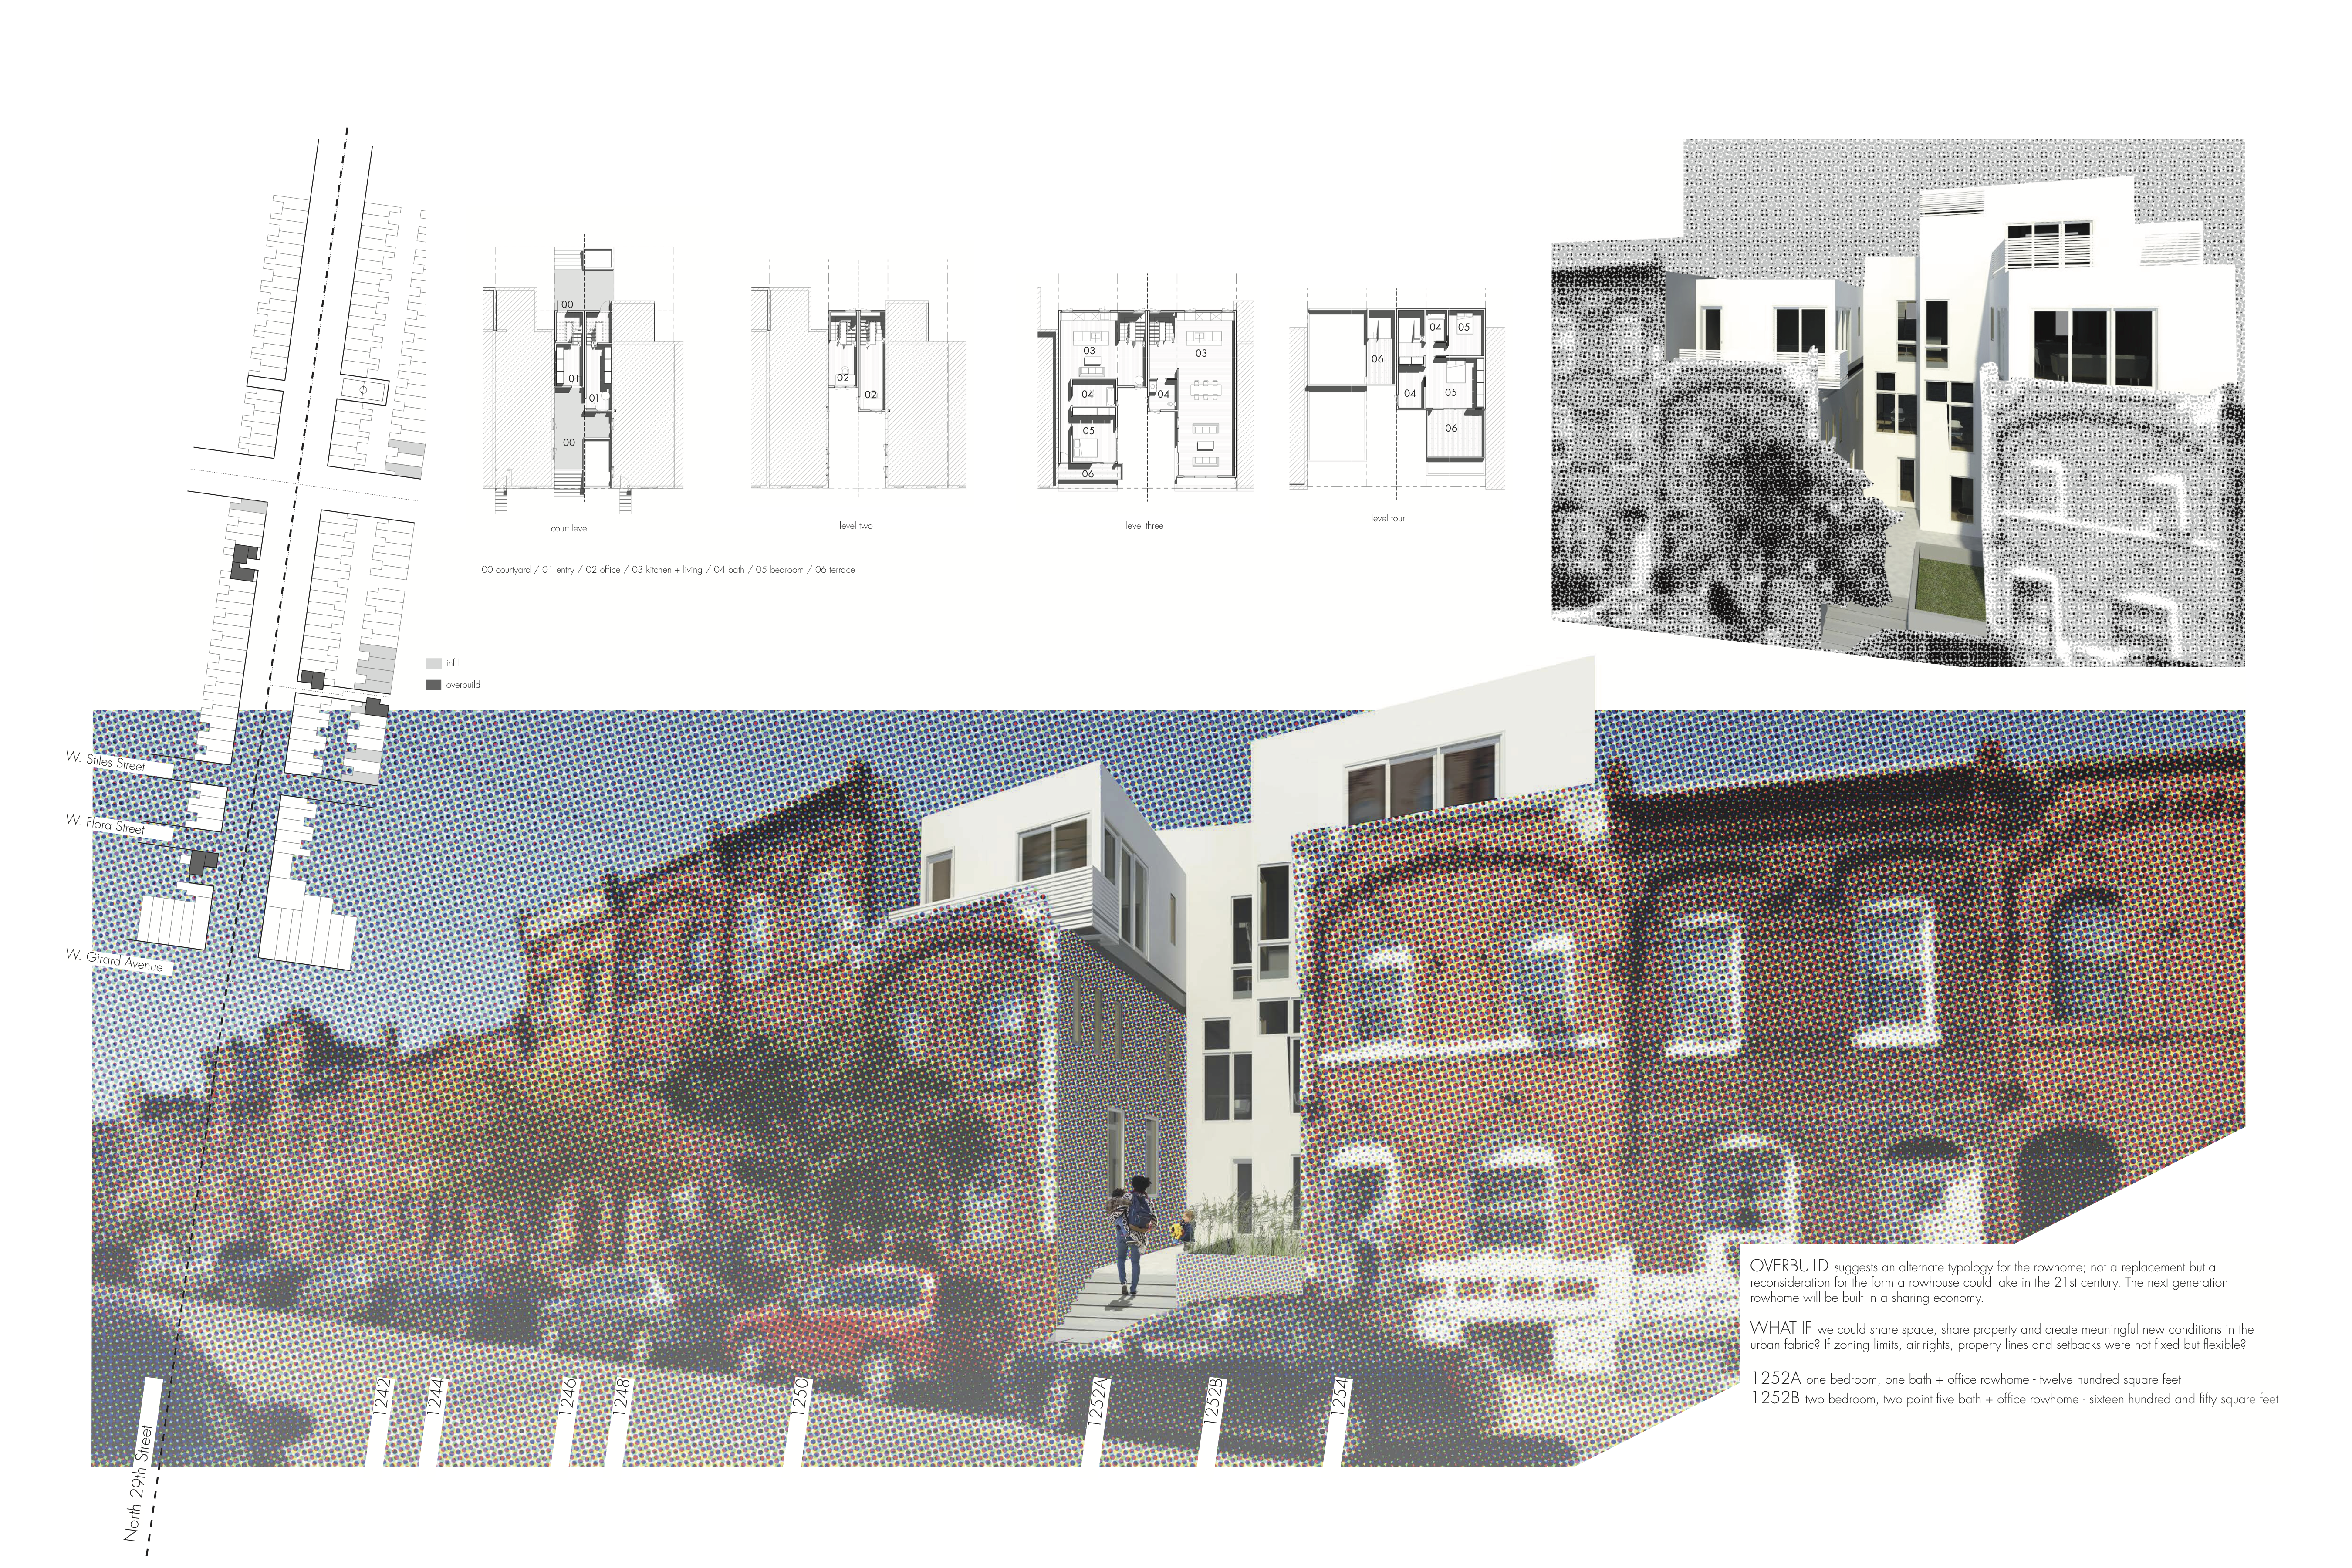 21st Century Rowhouse - Brewerytown: Overbuild - by David and Jacklynn Niemiec